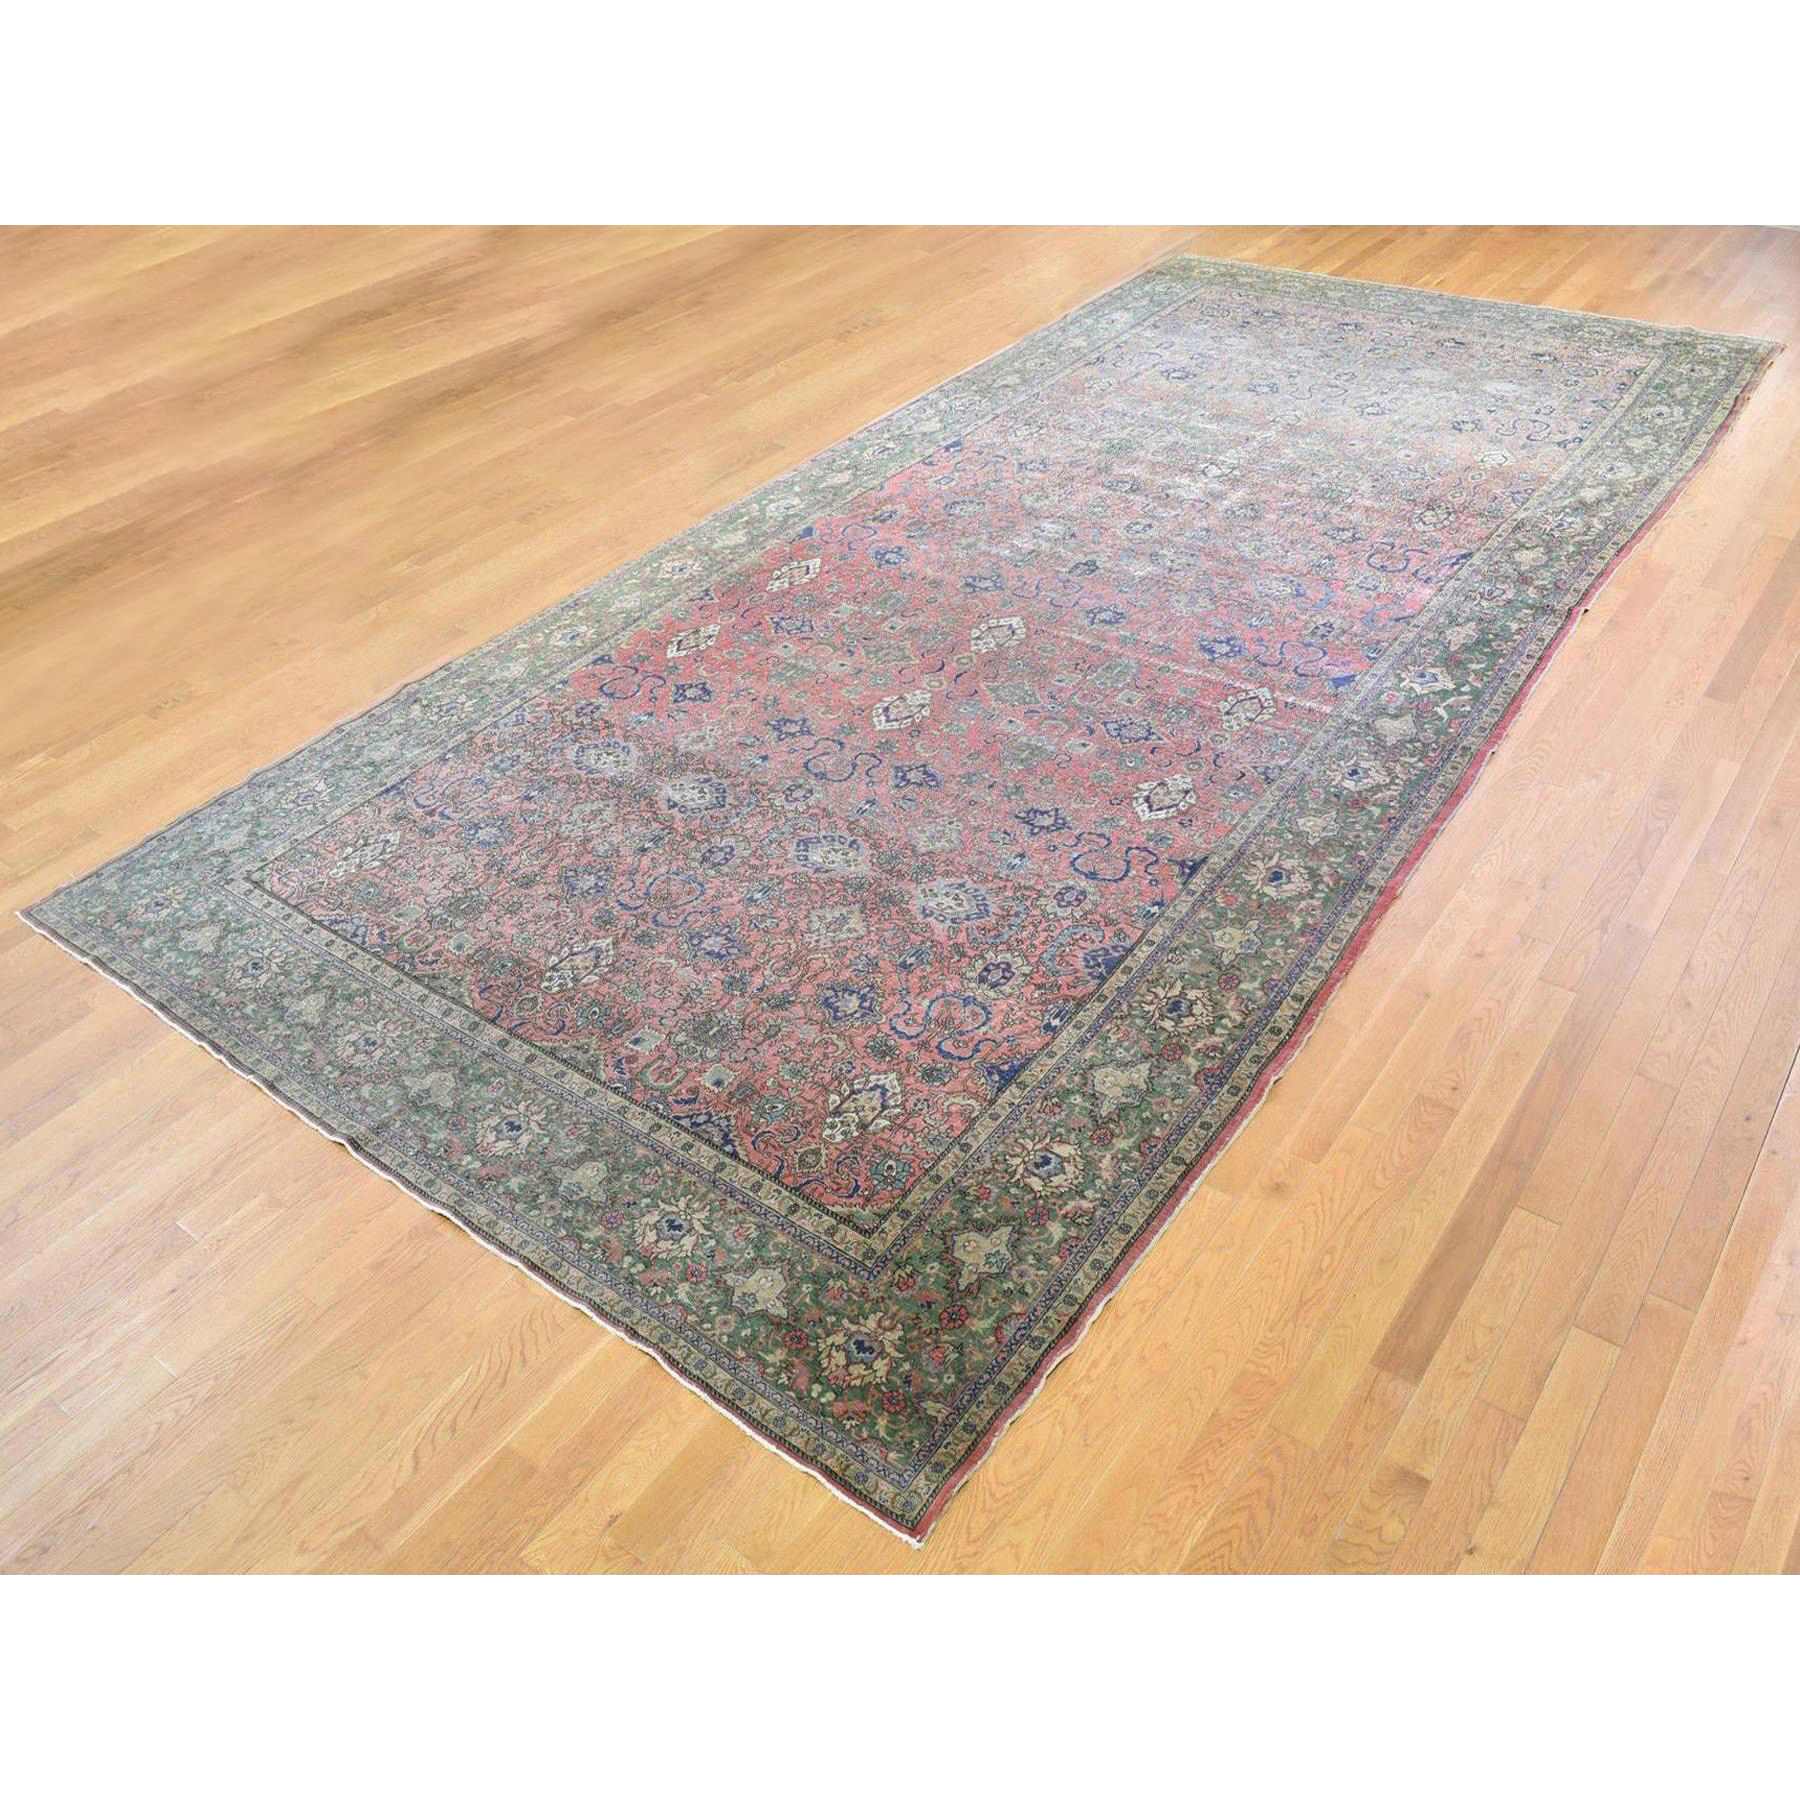 Antique-Hand-Knotted-Rug-334975